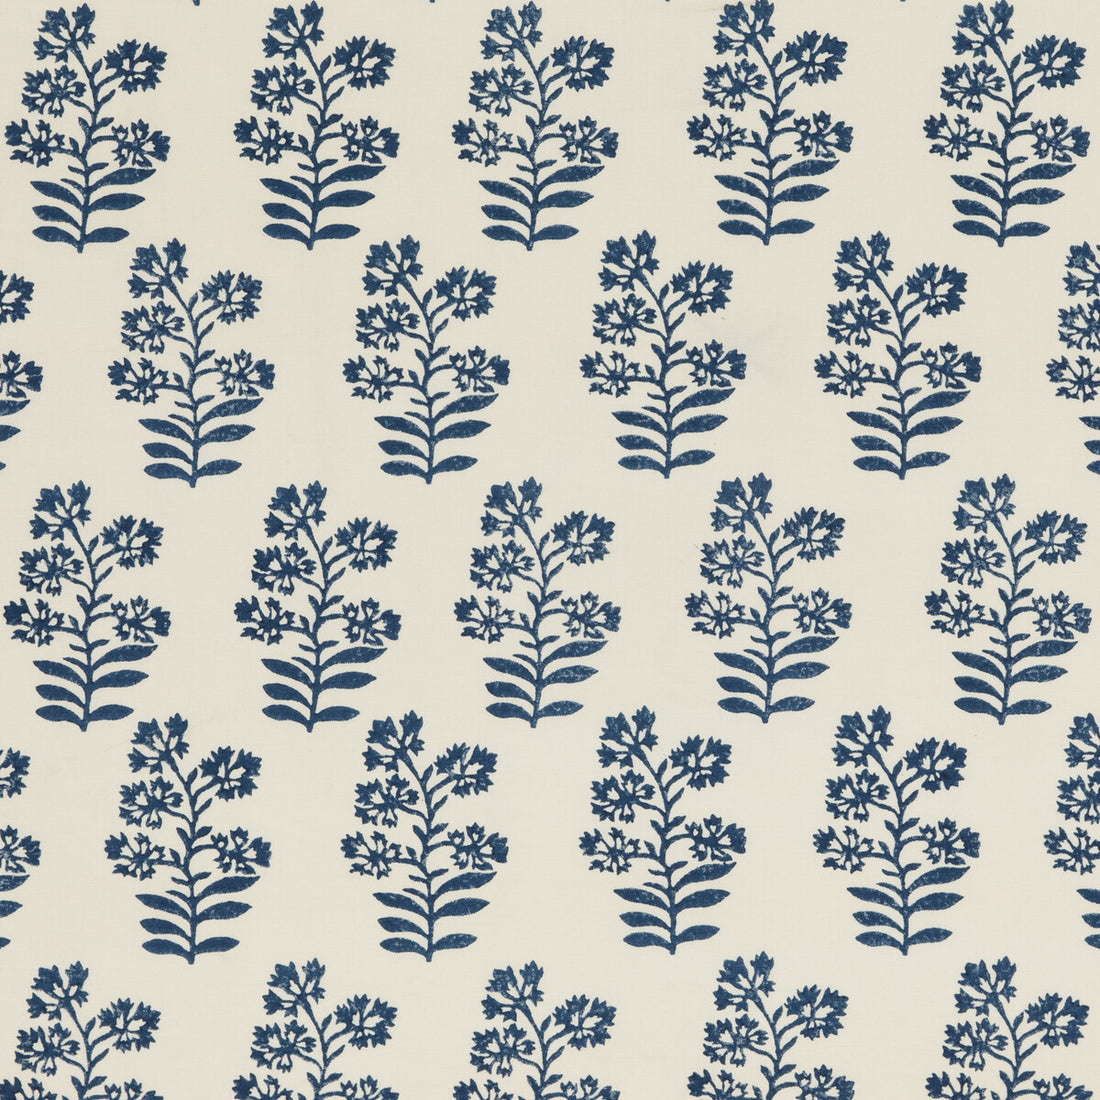 Wild Flower fabric in indigo color - pattern PP50483.1.0 - by Baker Lifestyle in the Block Party collection